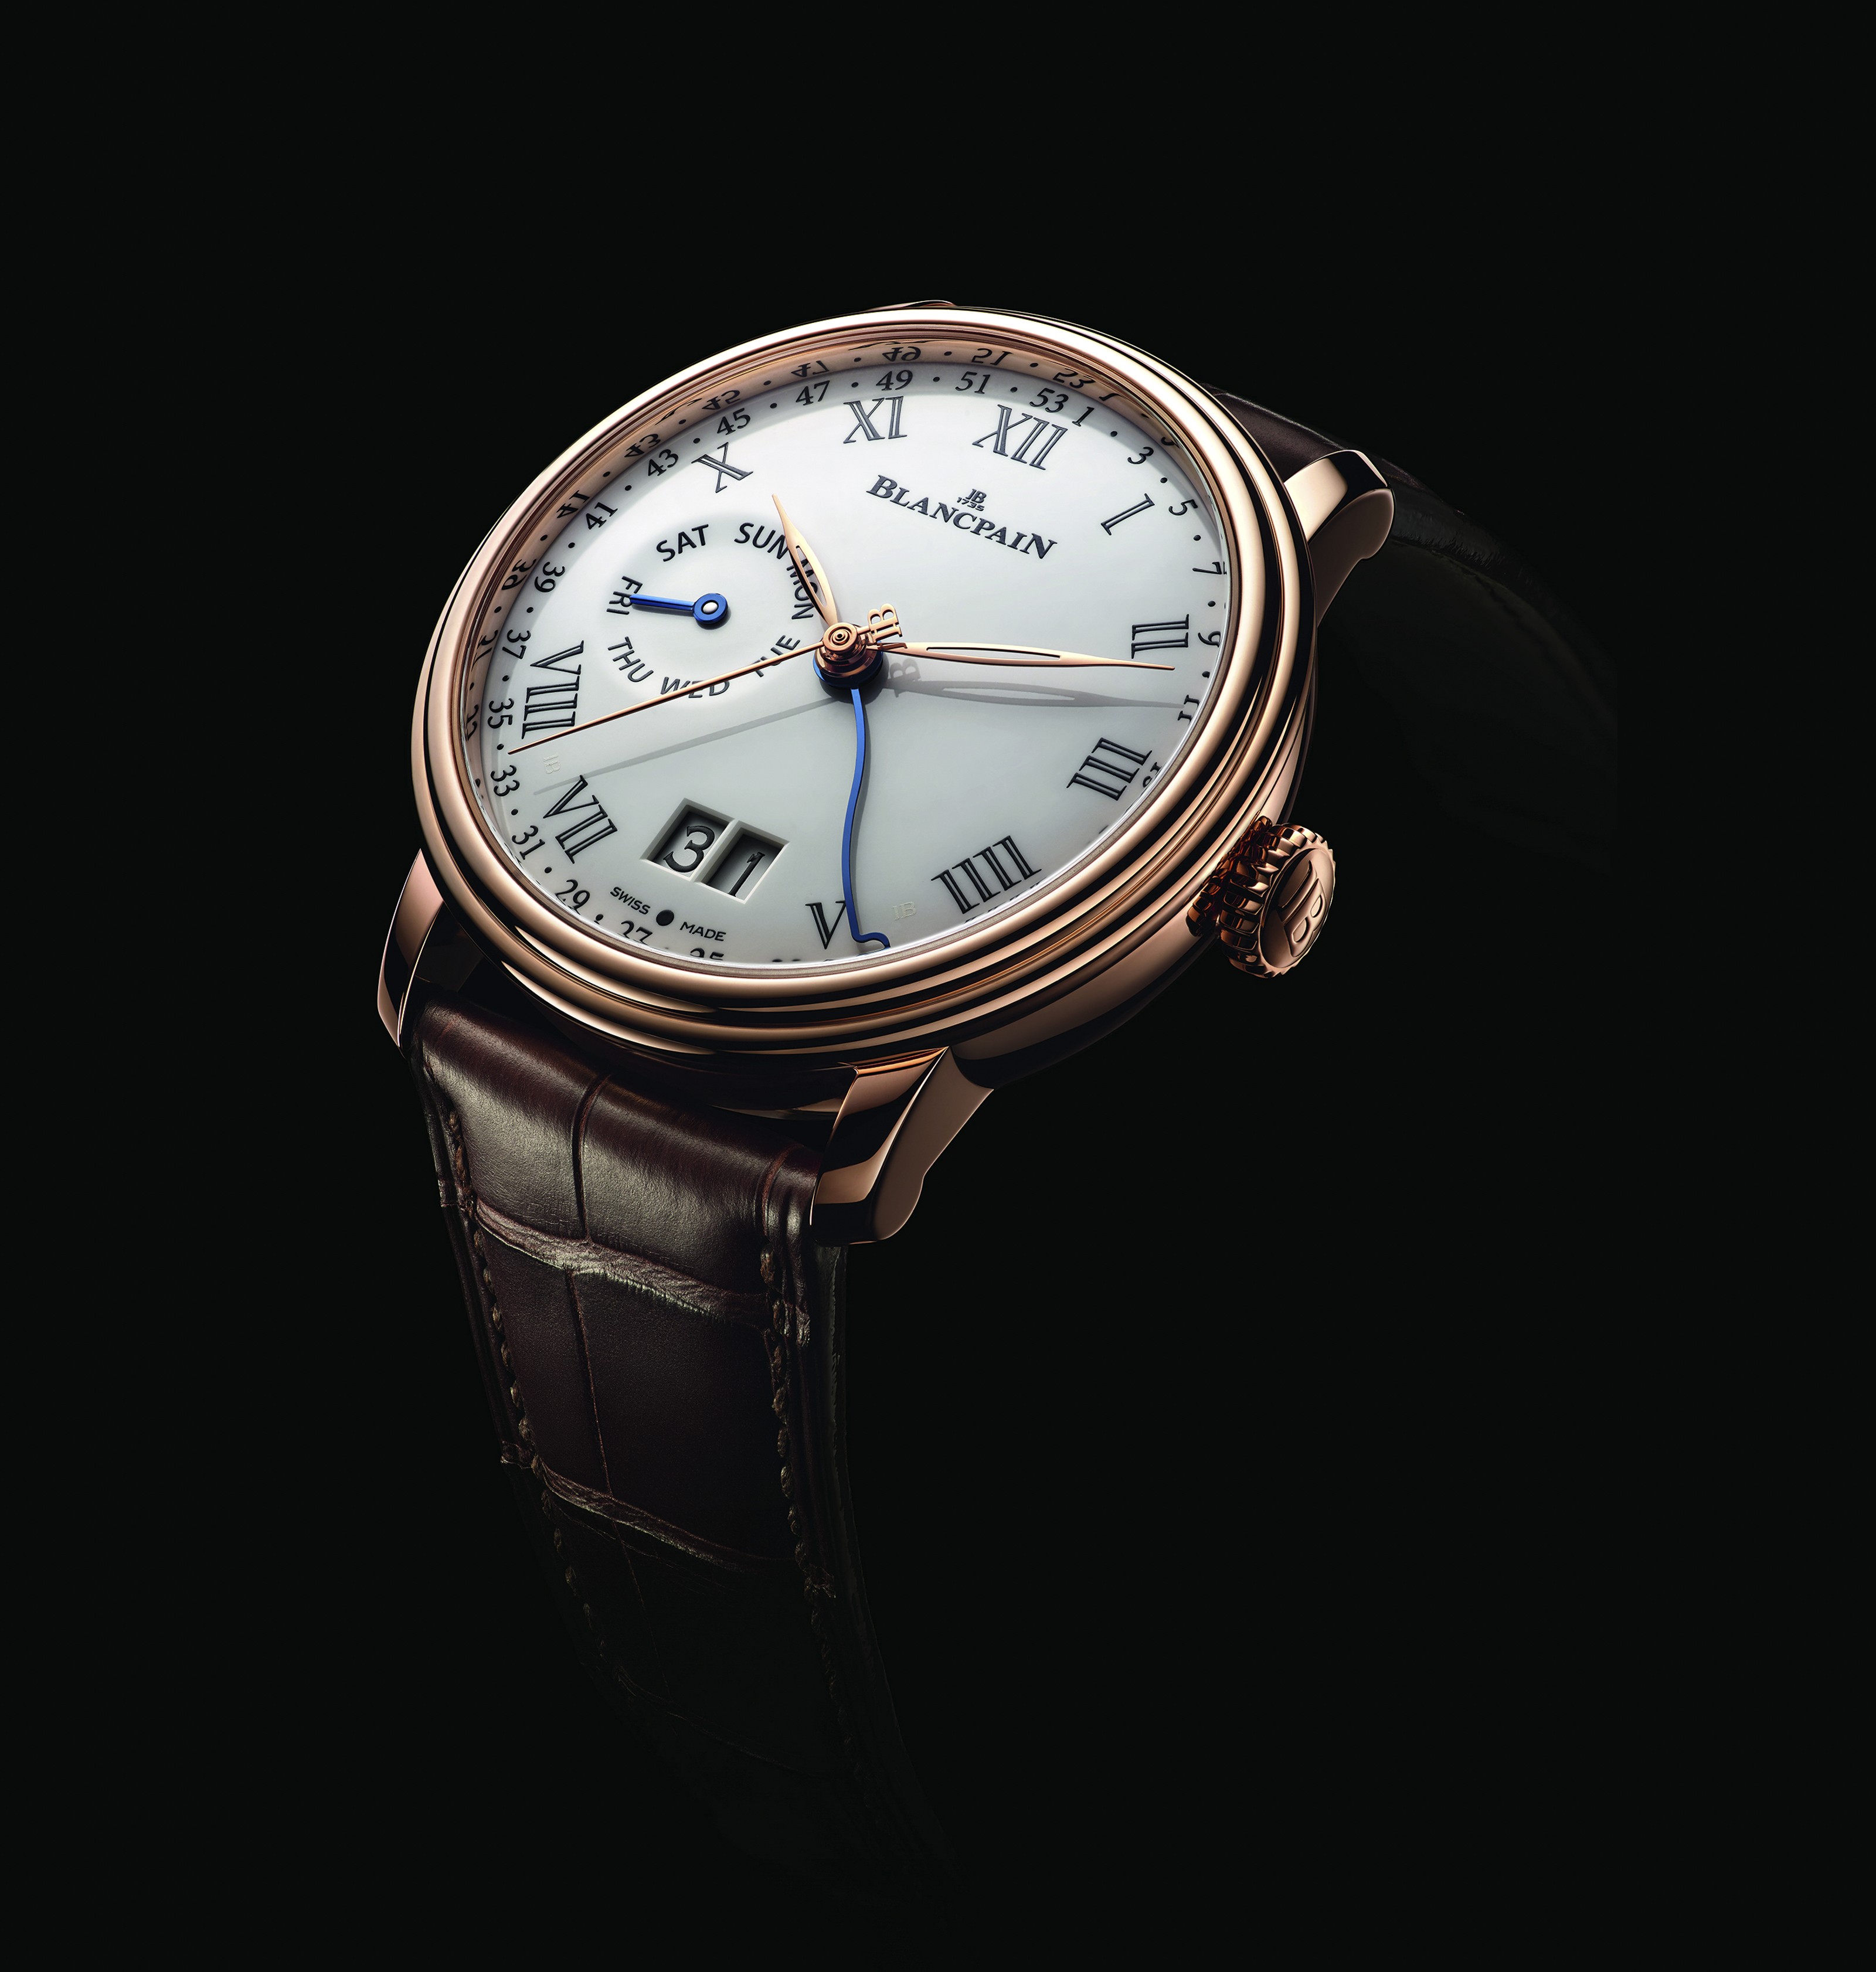 Timepieces from Breguet, Blancpain and A Lange & Söhne that are worth every penny